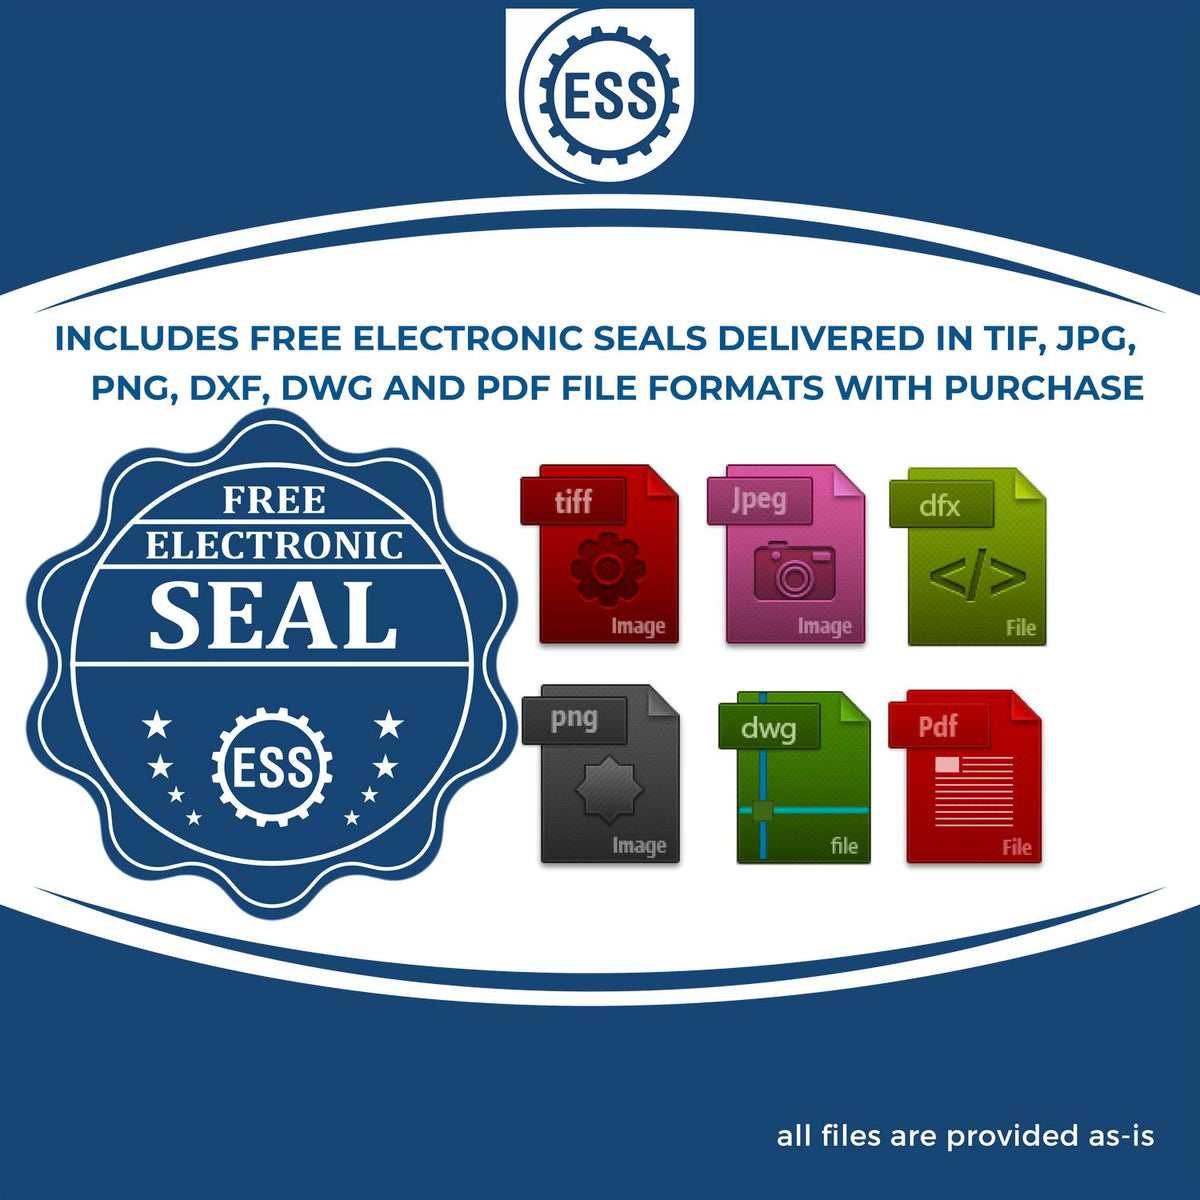 An infographic for the free electronic seal for the Hybrid West Virginia Architect Seal illustrating the different file type icons such as DXF, DWG, TIF, JPG and PNG.